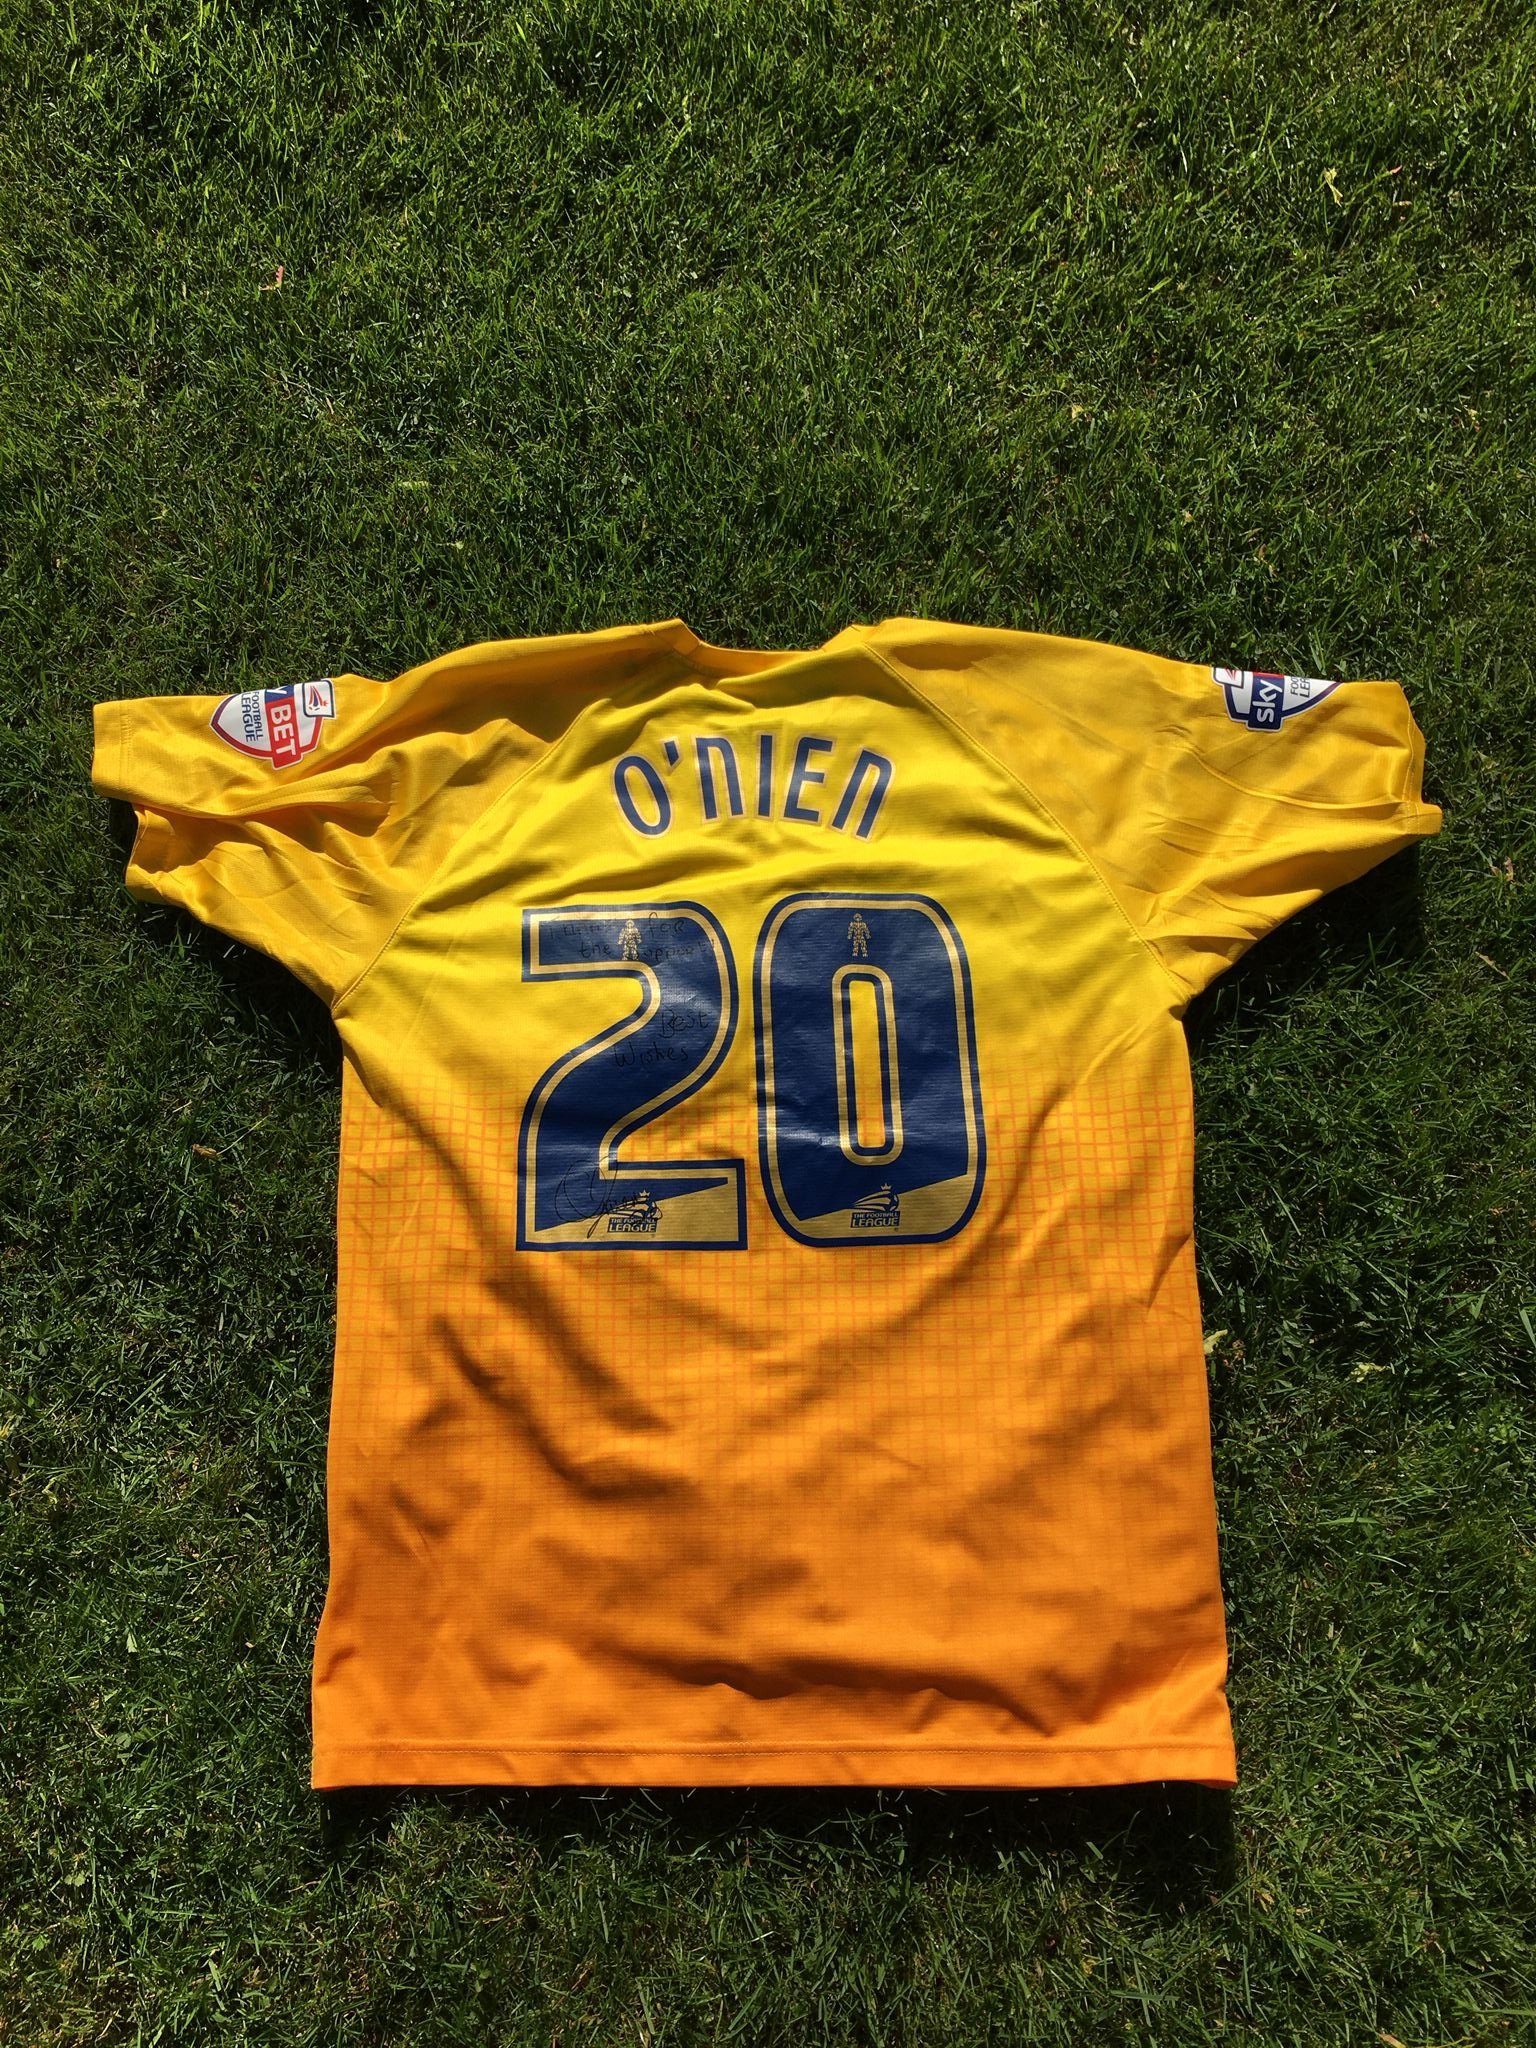 The signed Luke ONien shirt from the 2014-16 seasons